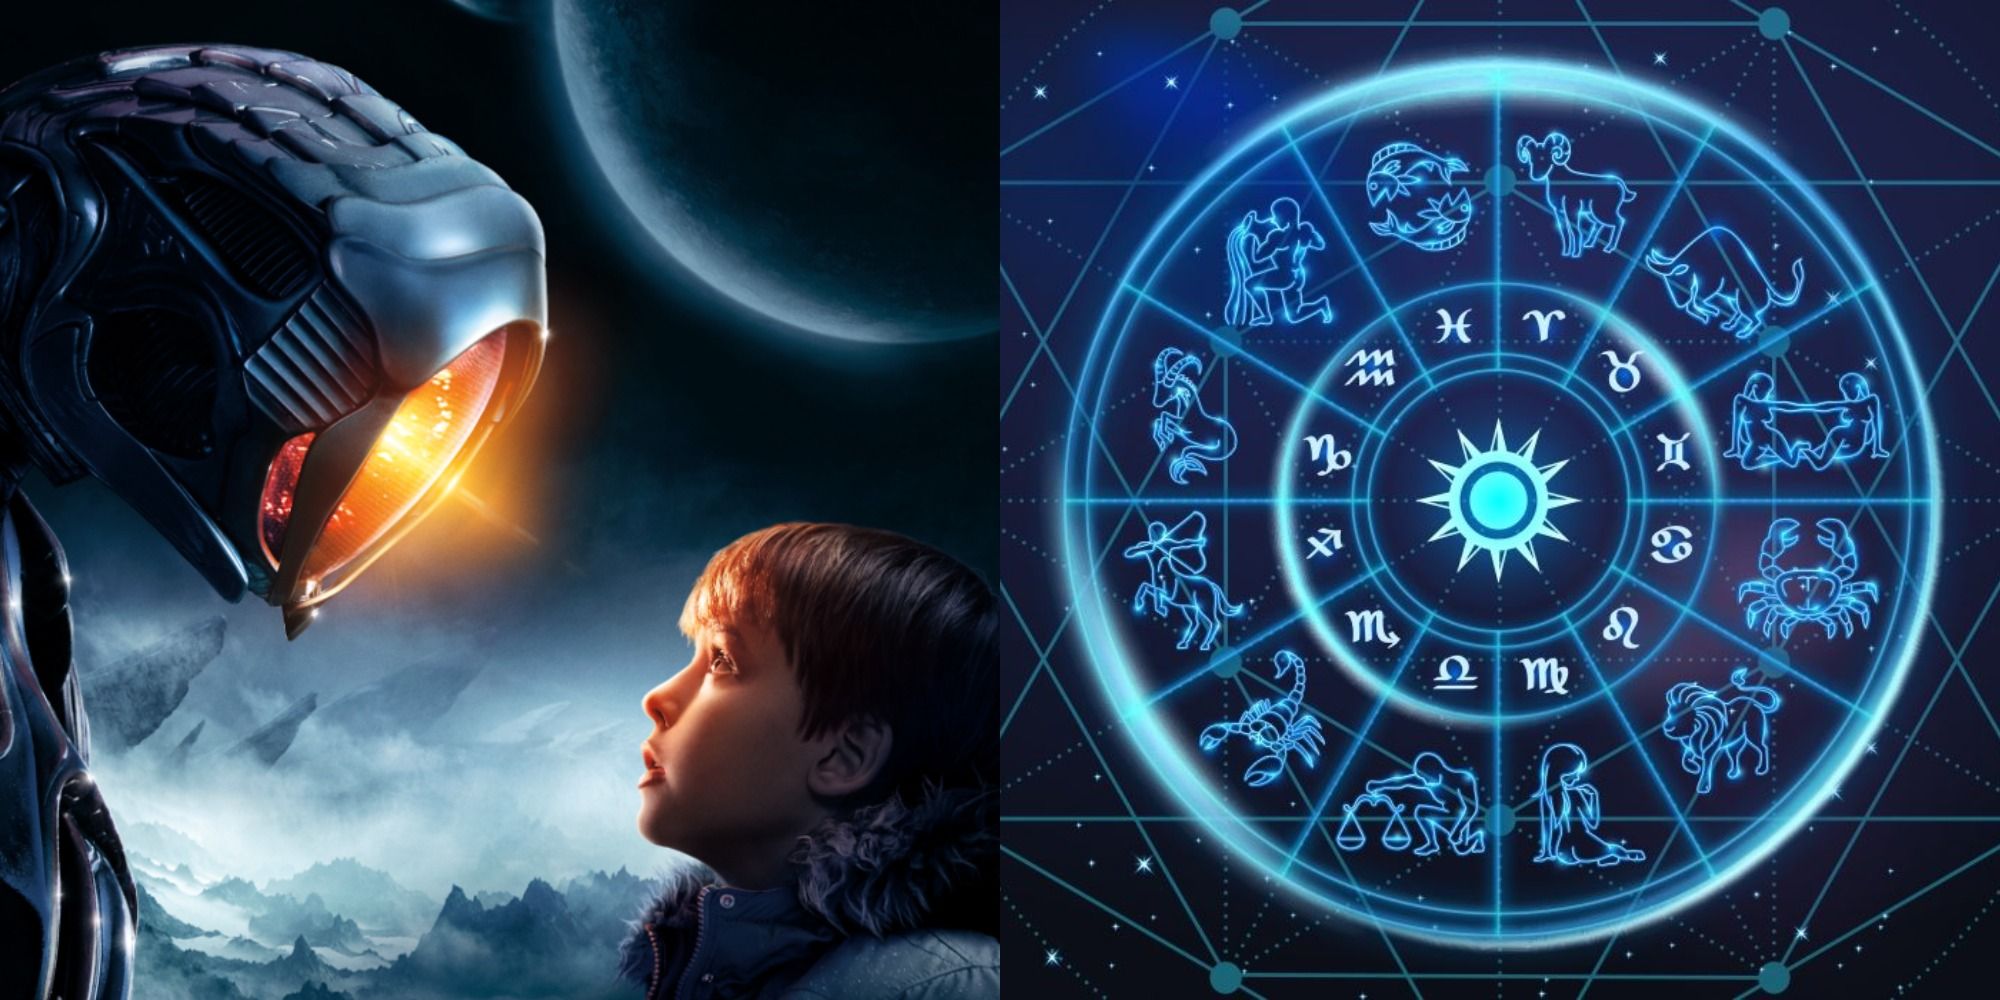 Split image showing the Robot looking at Will in Lost in Space, and a zodiac wheel